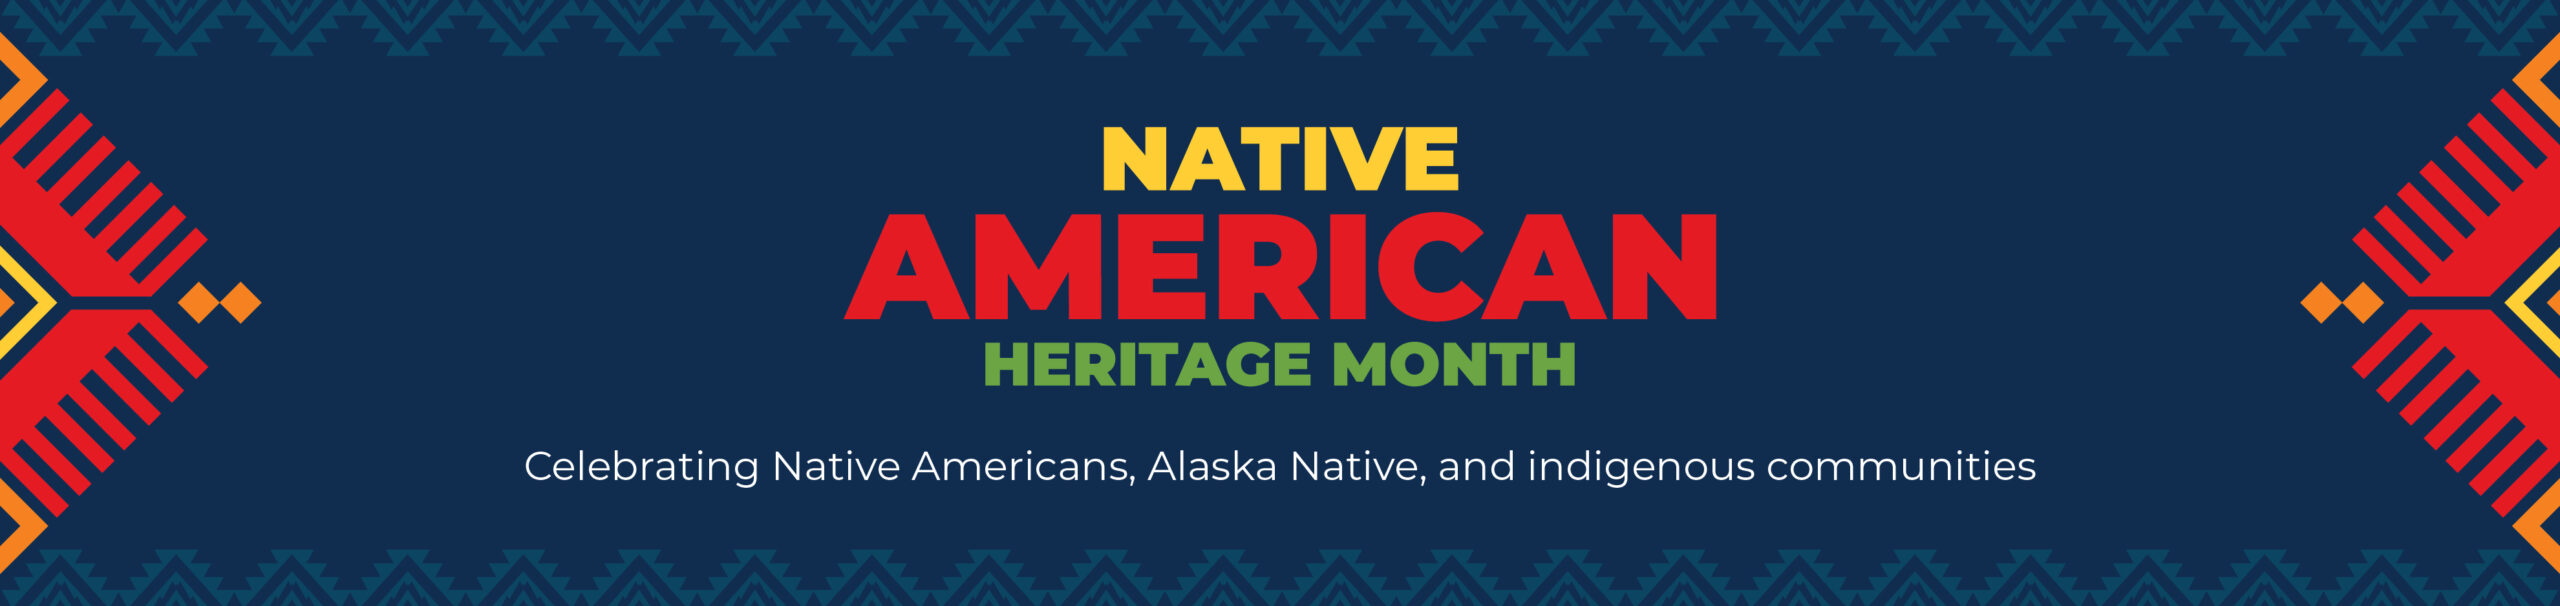 Native-American-Heritage-Month_Web-Banner